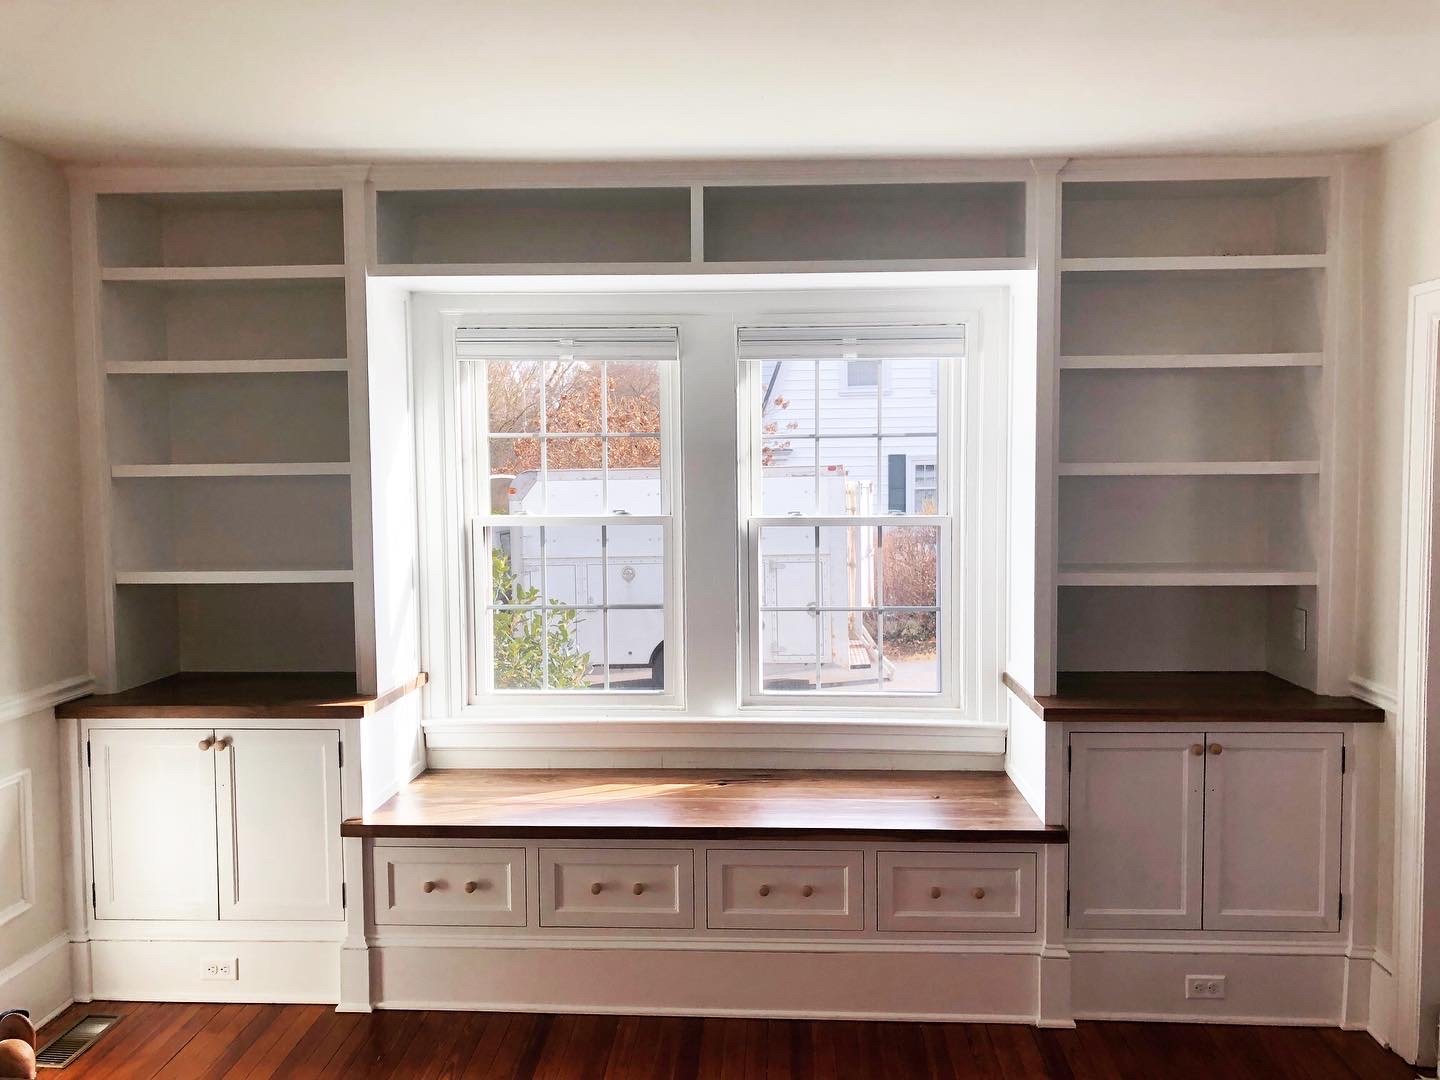  These built-ins are the larger of the pair and features flat panel doors and drawers, and black walnut countertops. The kids of the house were staking claims to the window seat even before it was finished.  